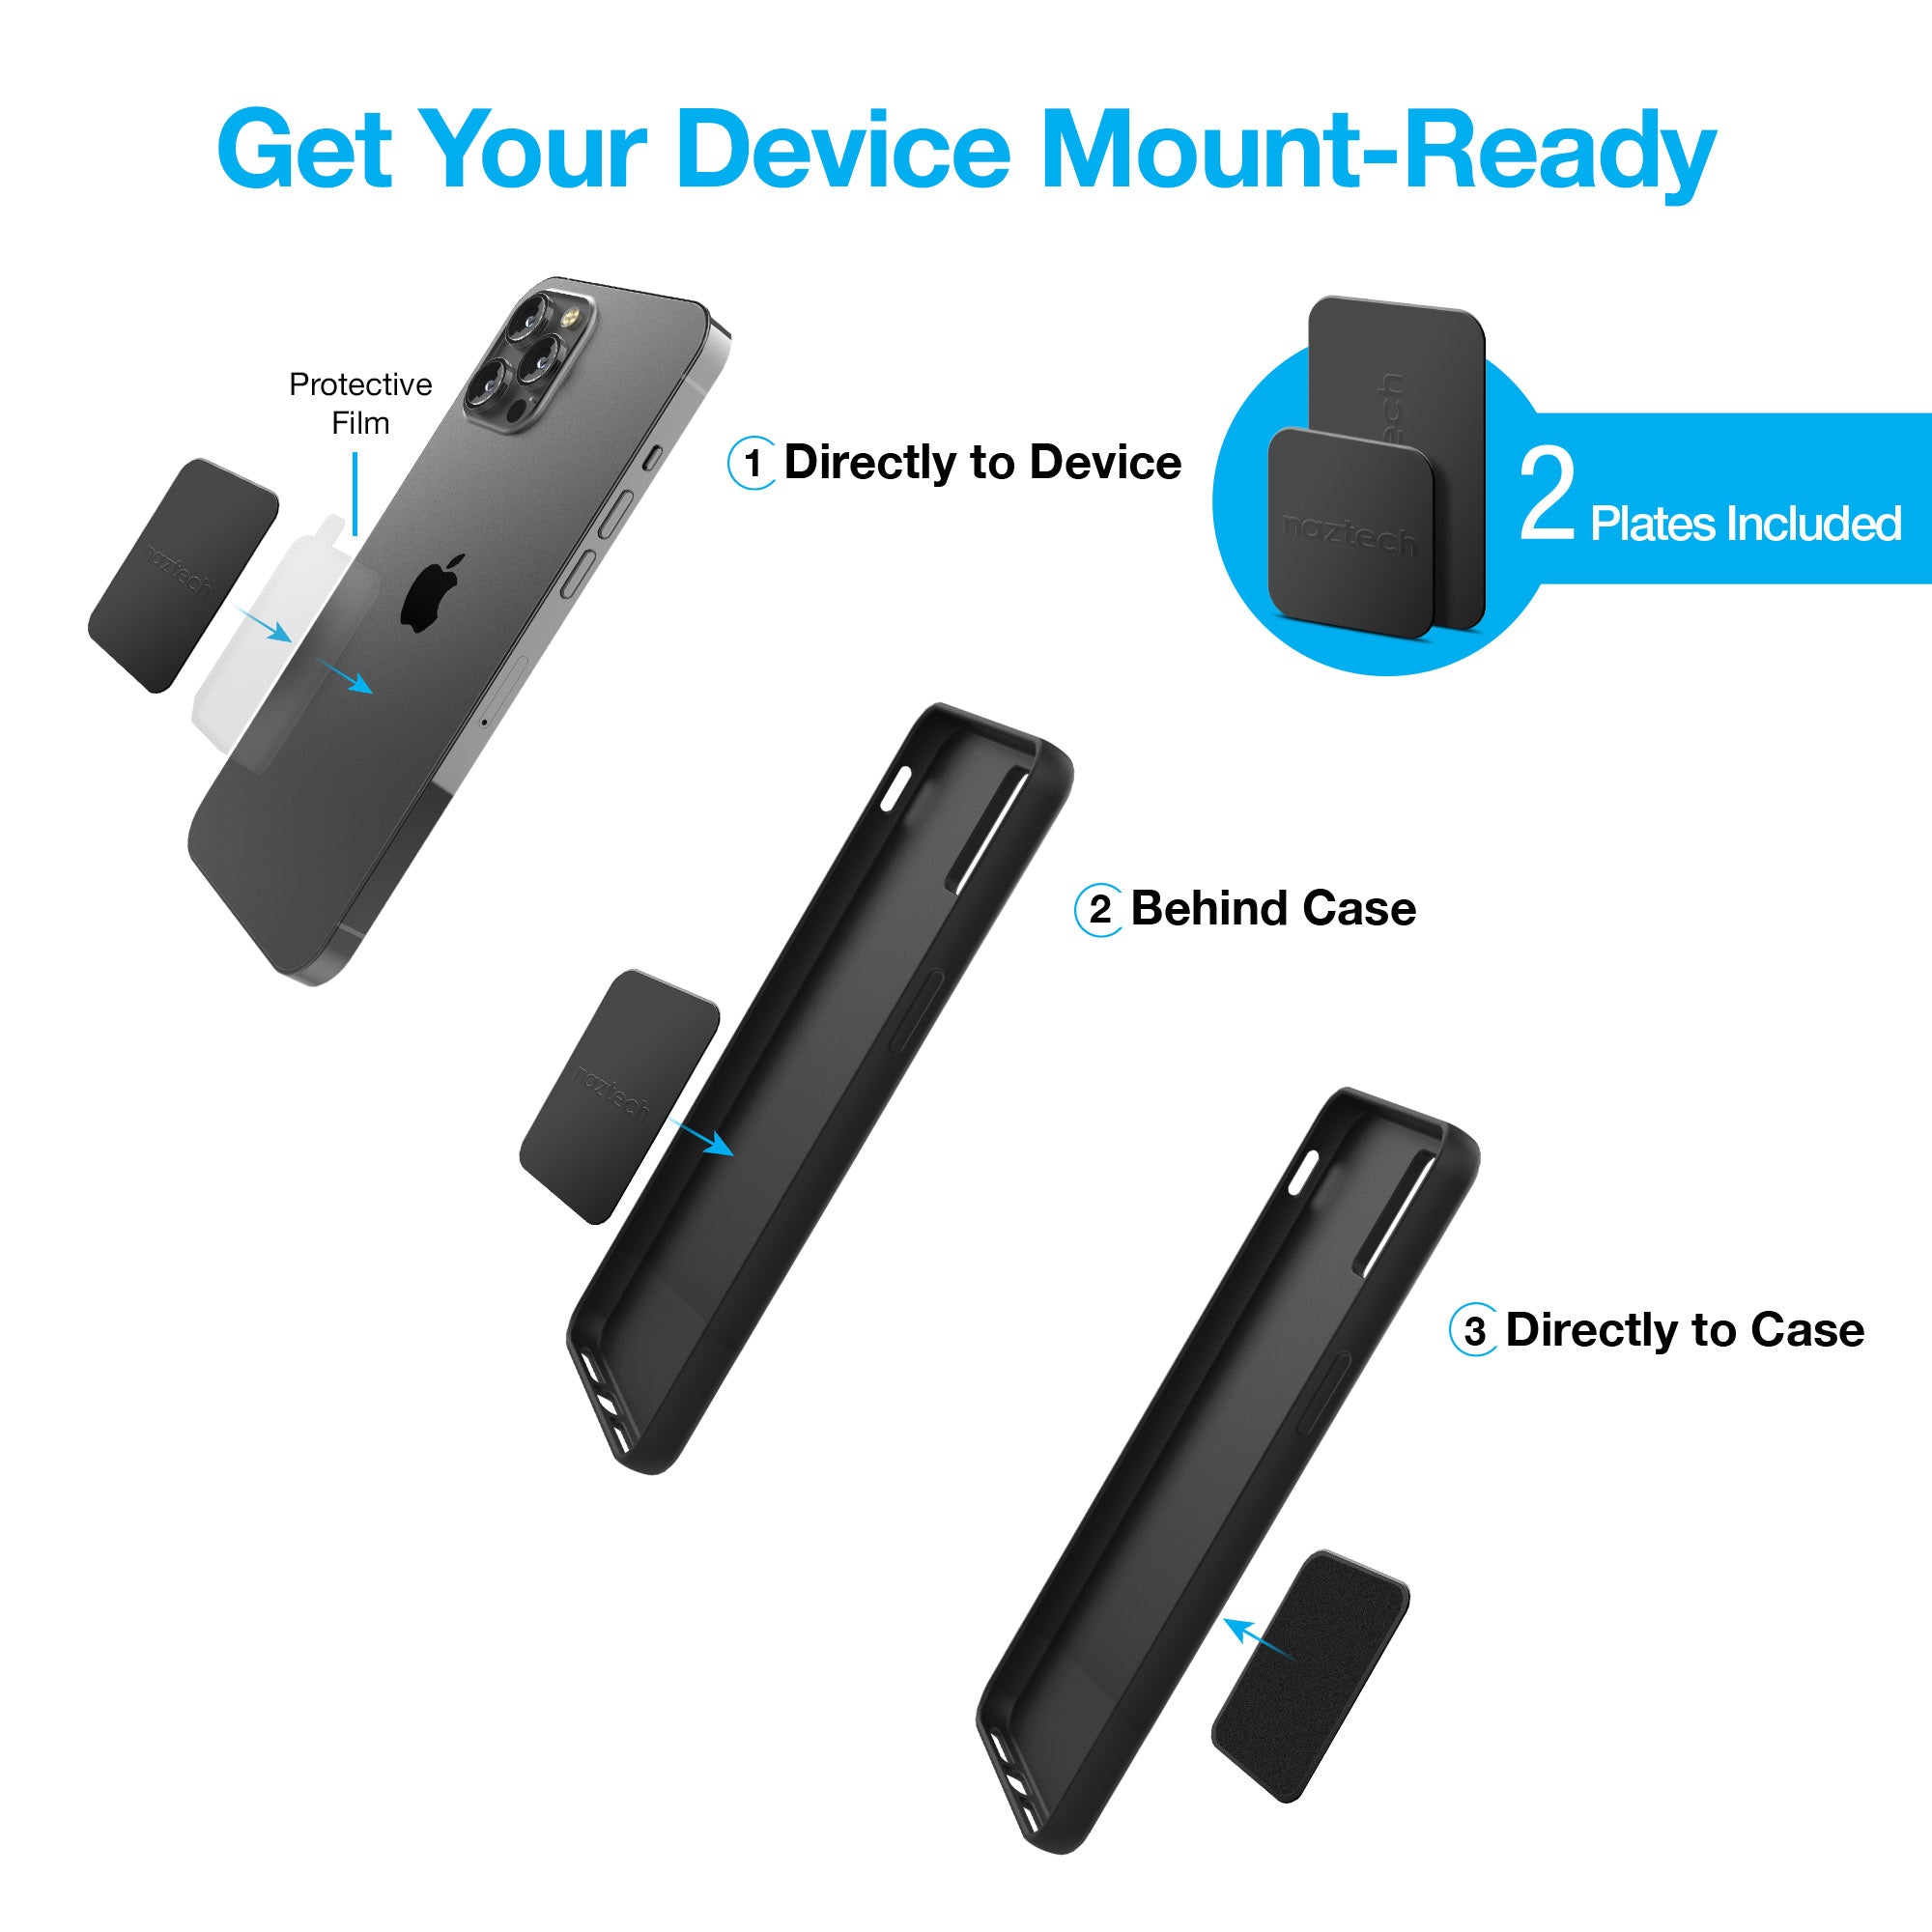 Magnetic Phone Mount Anywhere, MagBuddy